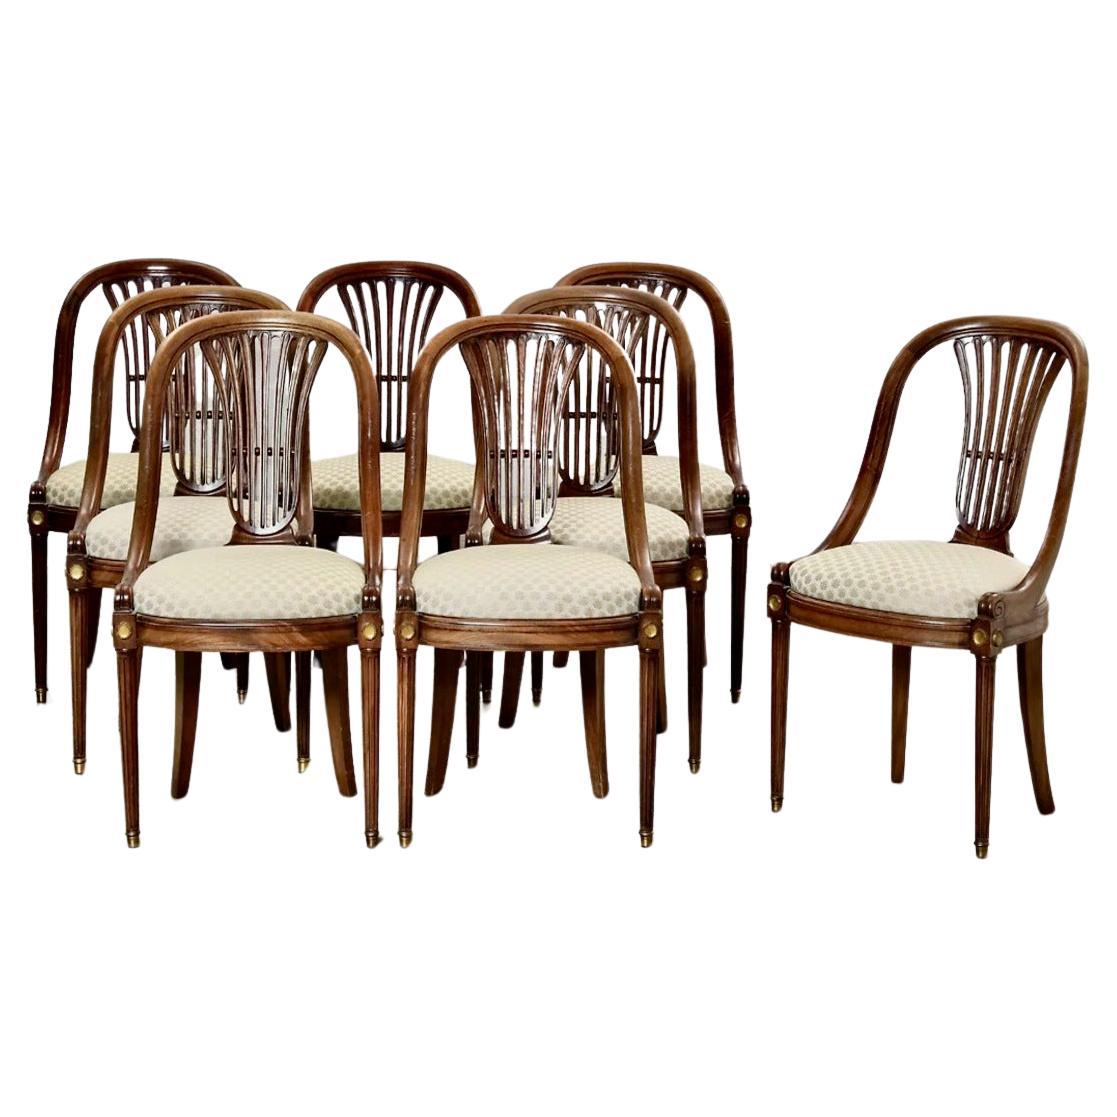 Early 20th c. French Dining Chairs, Set of 8